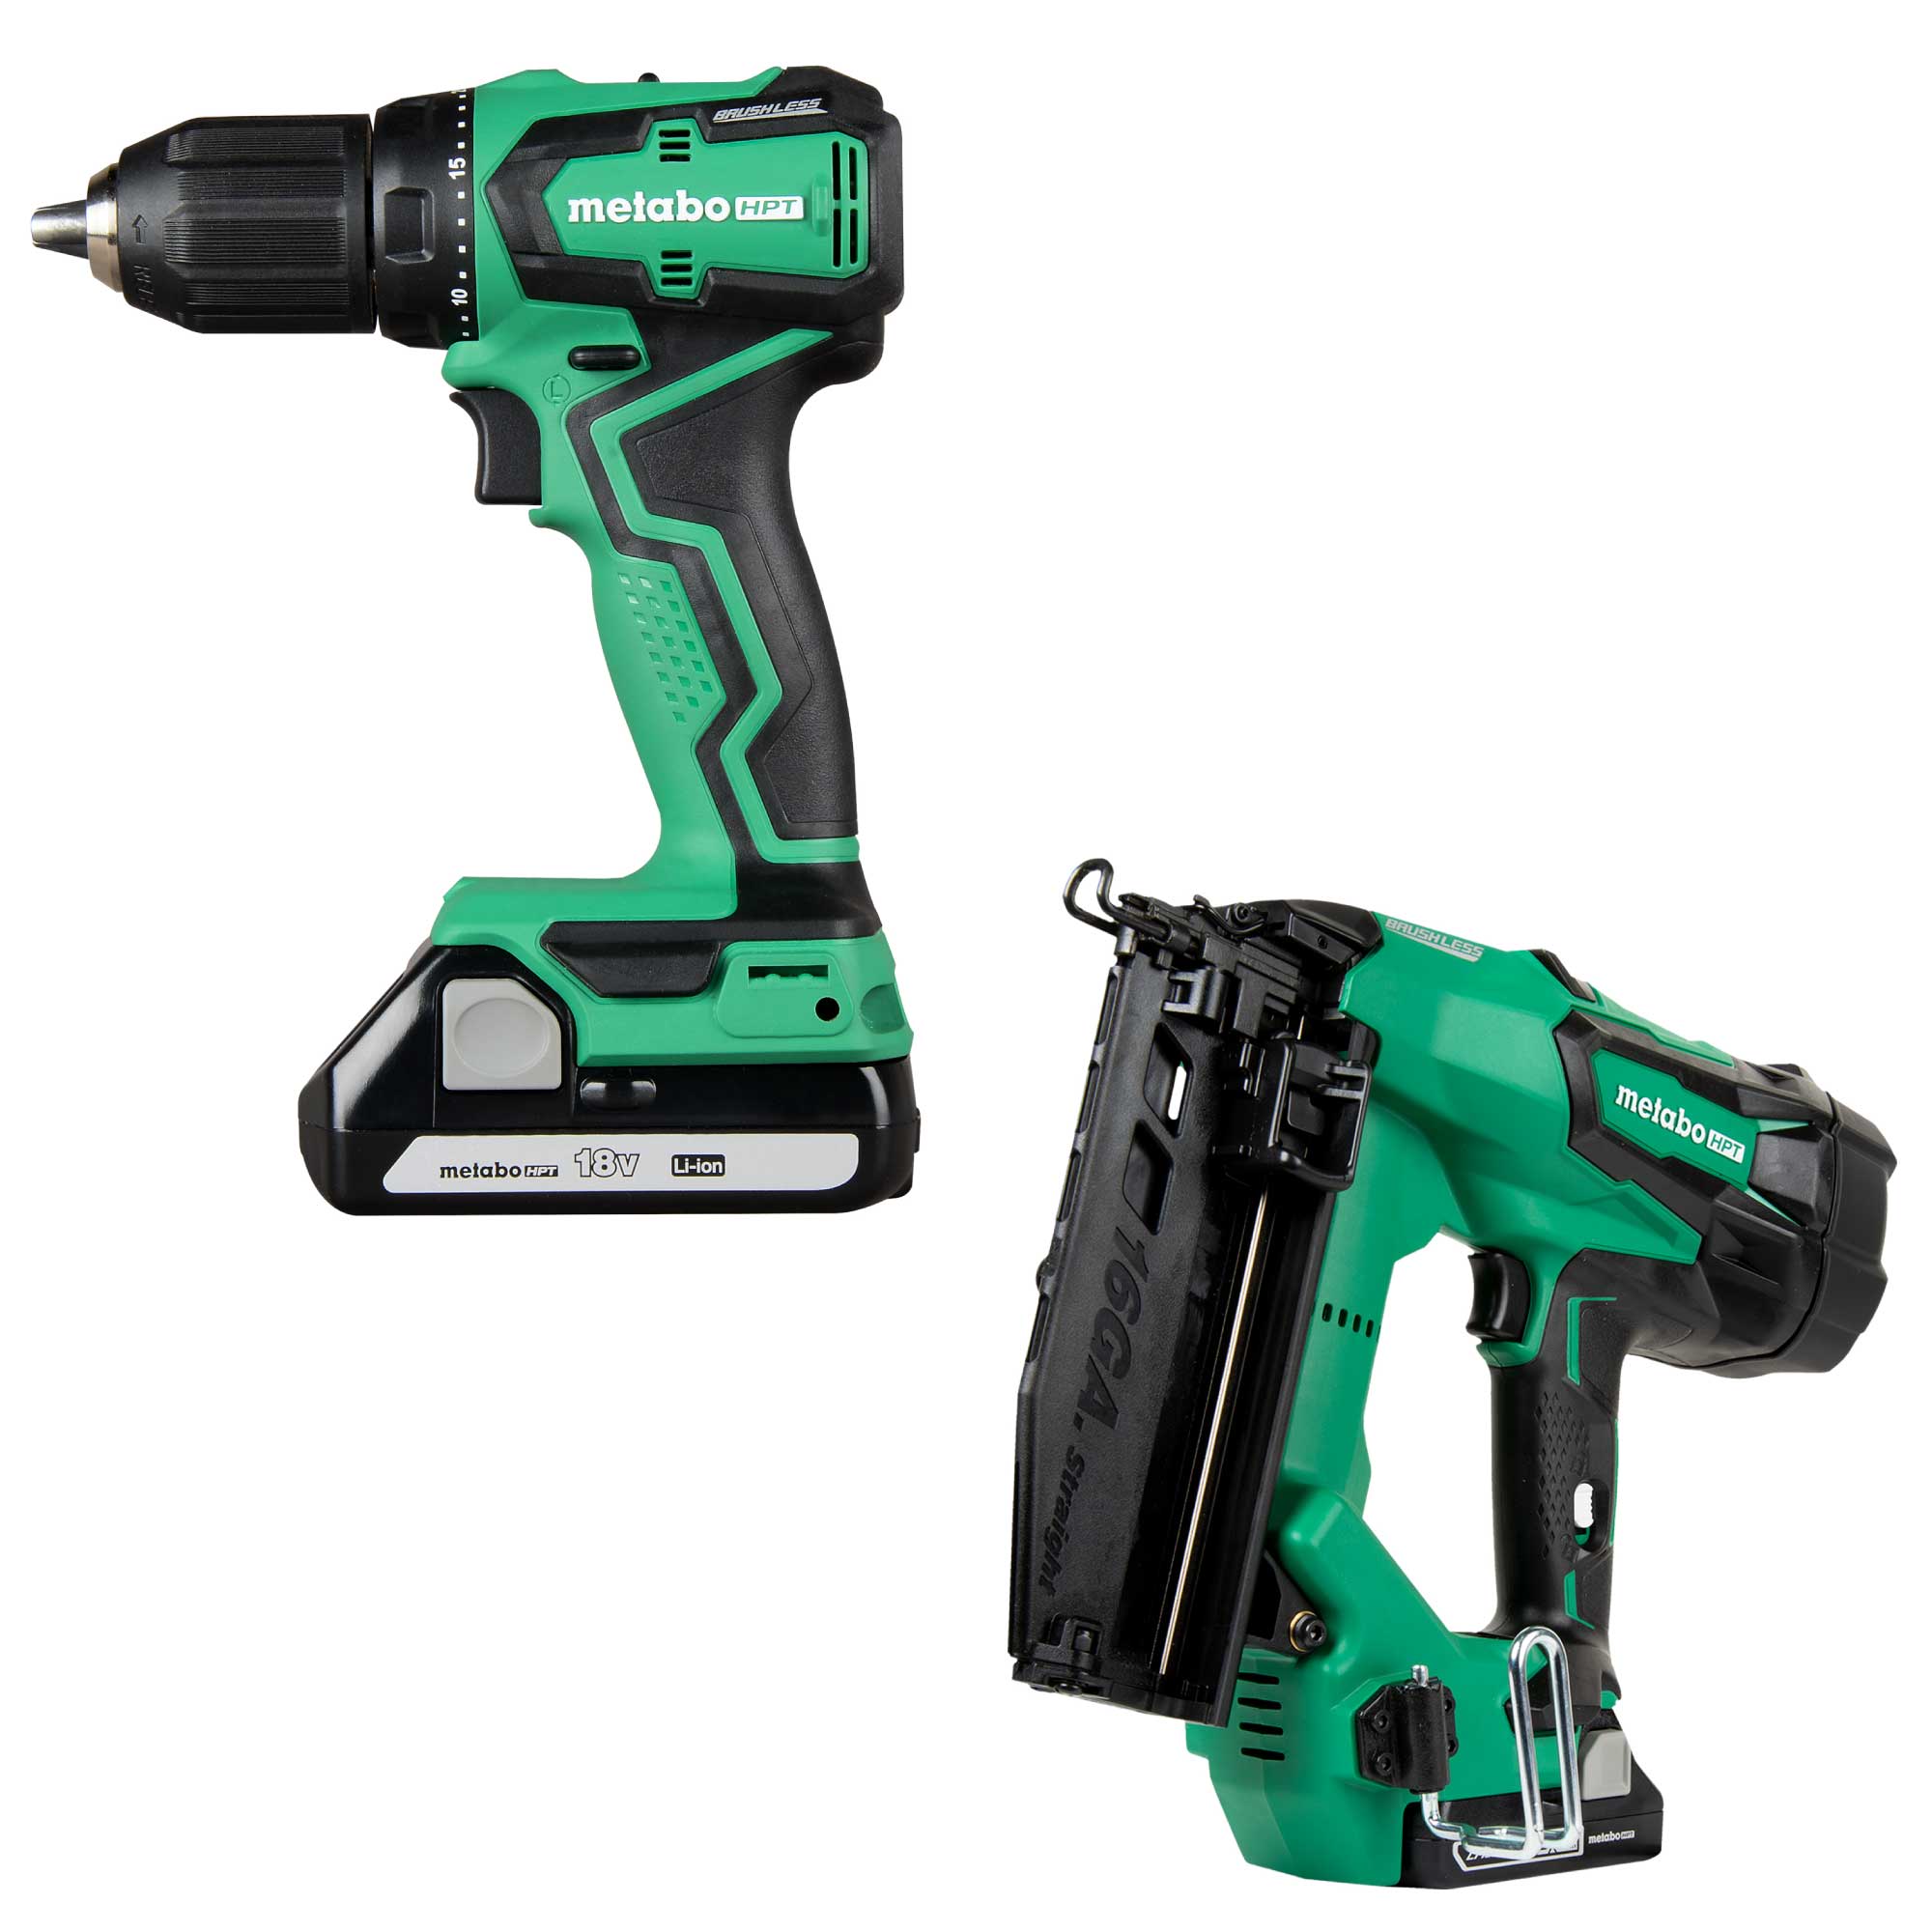 Metabo HPT MultiVolt 18-volt 1/2-in Keyless Brushless Cordless Drill (2-batteries included and Charger included) with MultiVolt 18-Volt 16-Gauge